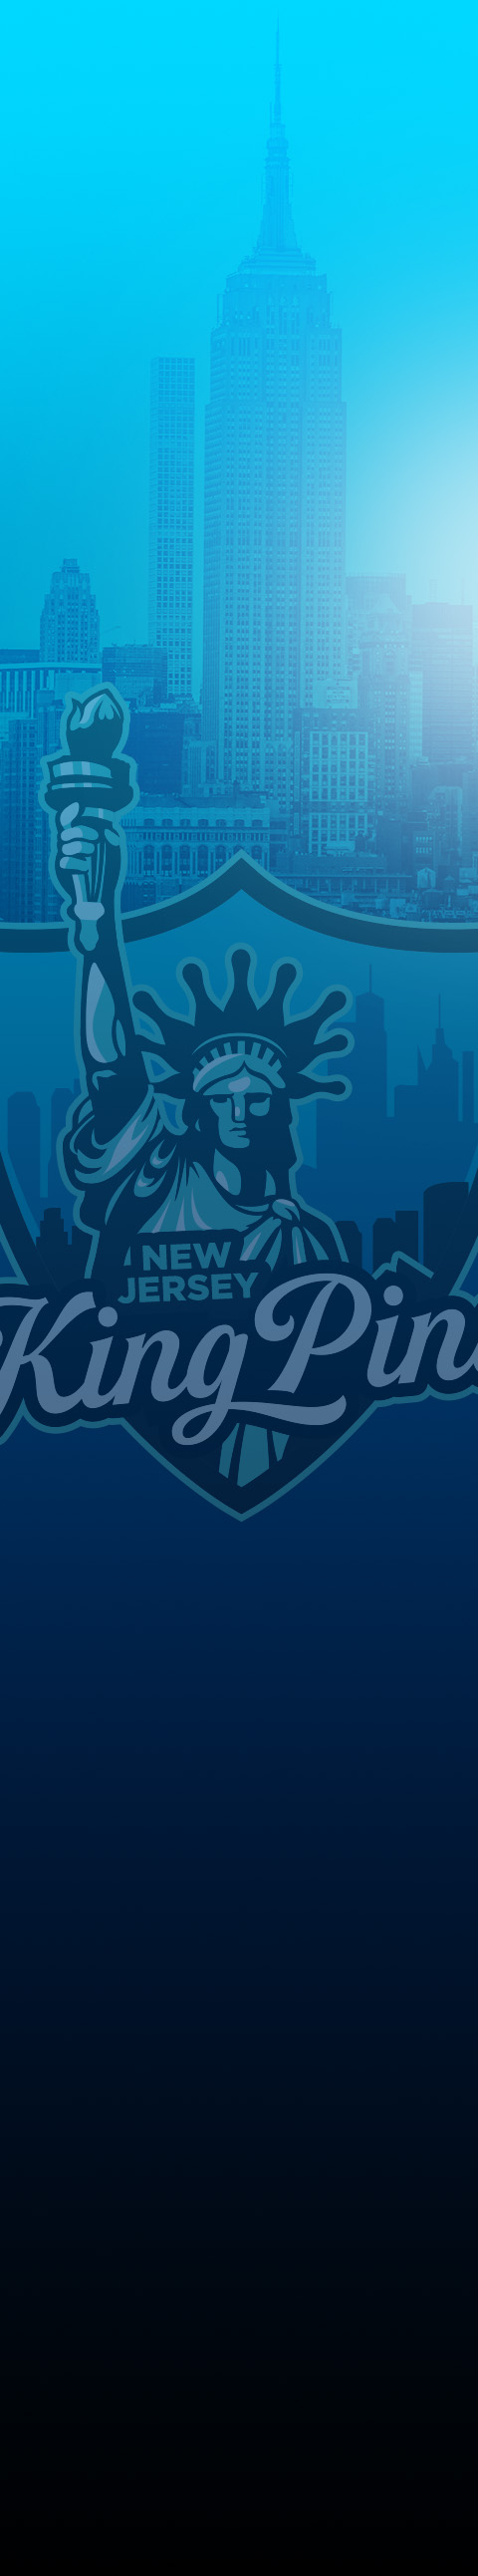 New Jersey Kingpins Logo in Front of New York Buildings